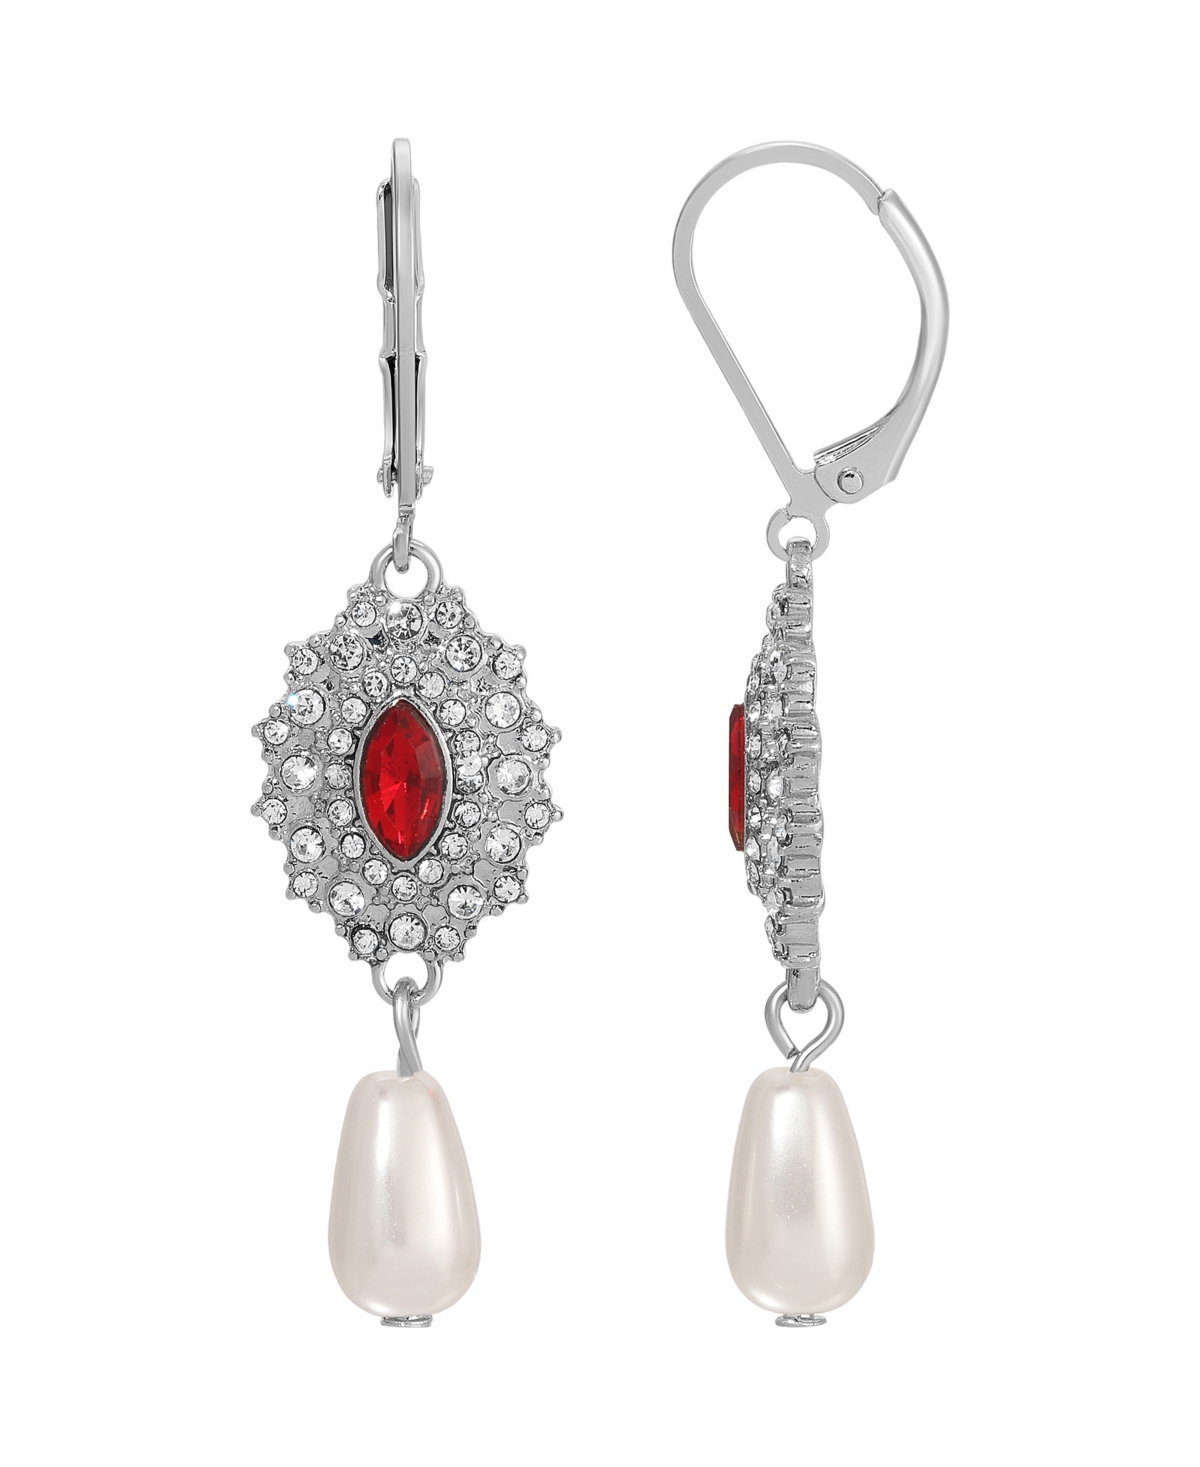 2028 Silver-tone Colored Stone Imitation Pearl Earrings In Red